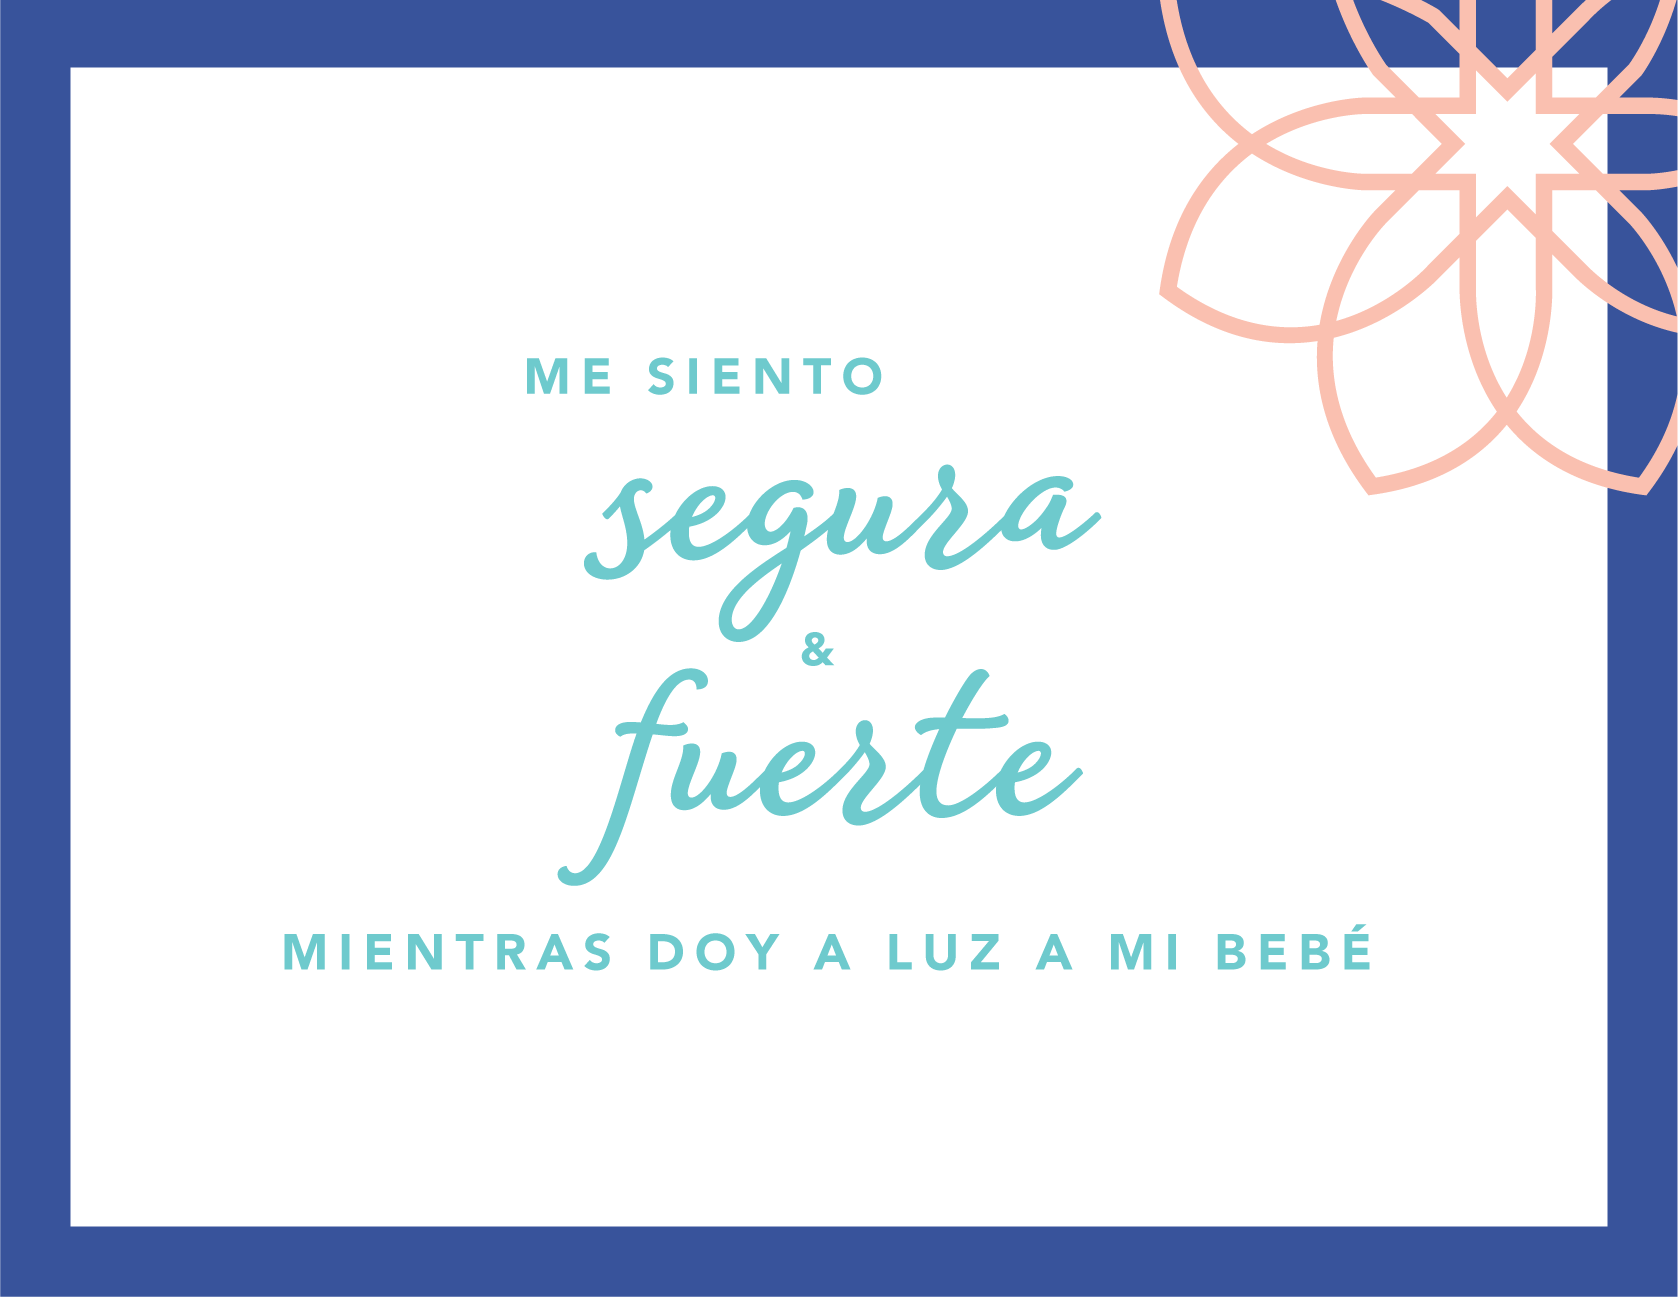 Birth Affirmation Cards for Expecting Parents [Digital Files] - English & Español